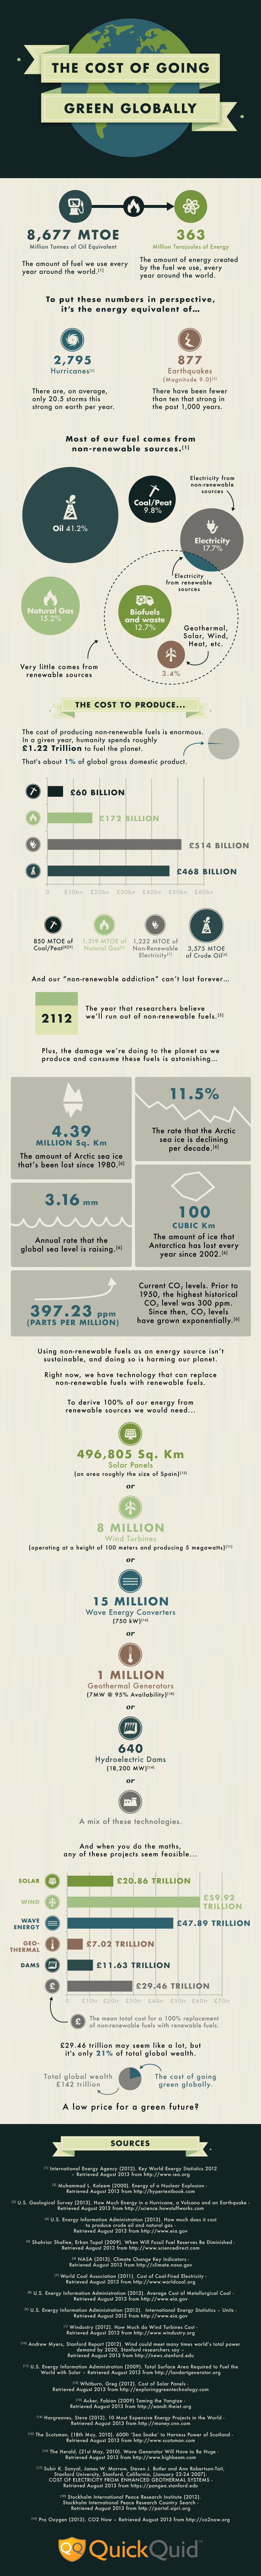 The Cost of Going Green Globally - Infographic